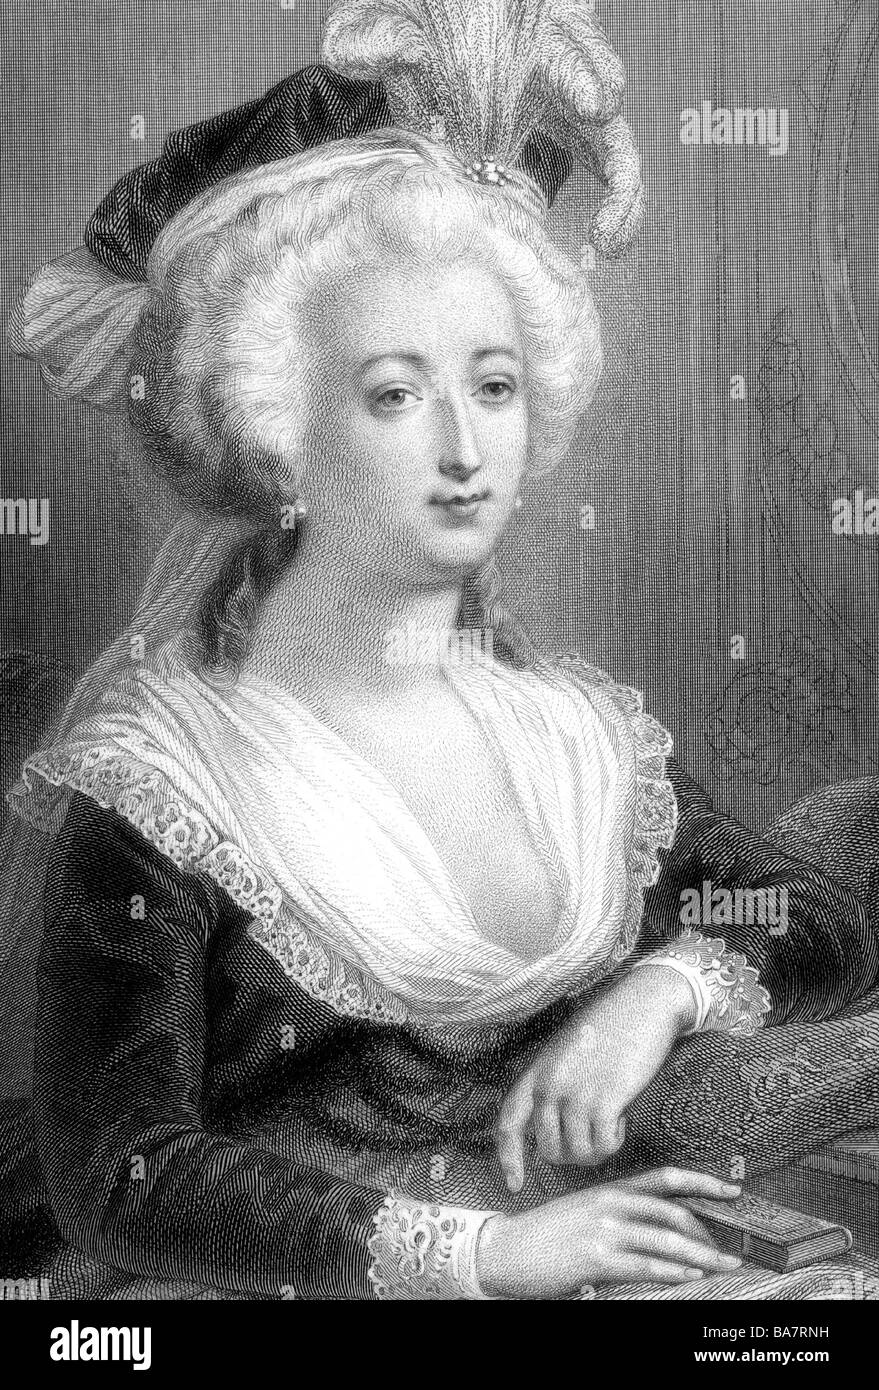 Marie Antoinette, 2.11.1755 - 16.10.1793, Queen consort of France 10.5.1774 - 21.9.1792, half length, steel engraving, 19th century, after contemporary image, Artist's Copyright has not to be cleared Stock Photo